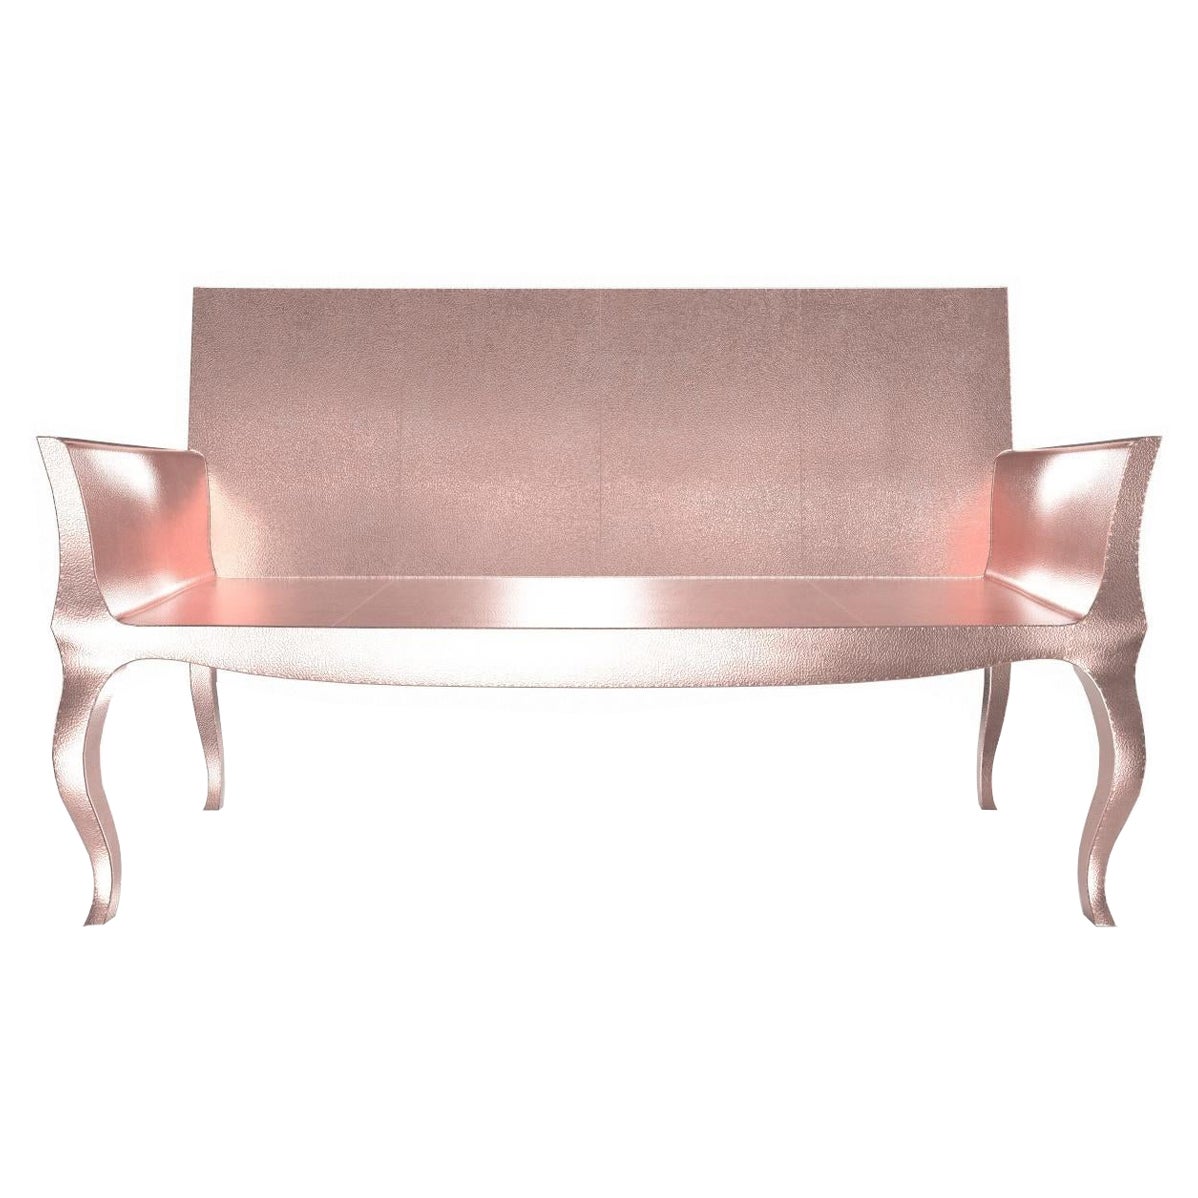 Louise Settee Art Deco Benches in Fine Hammered Copper by Paul Mathieu For Sale